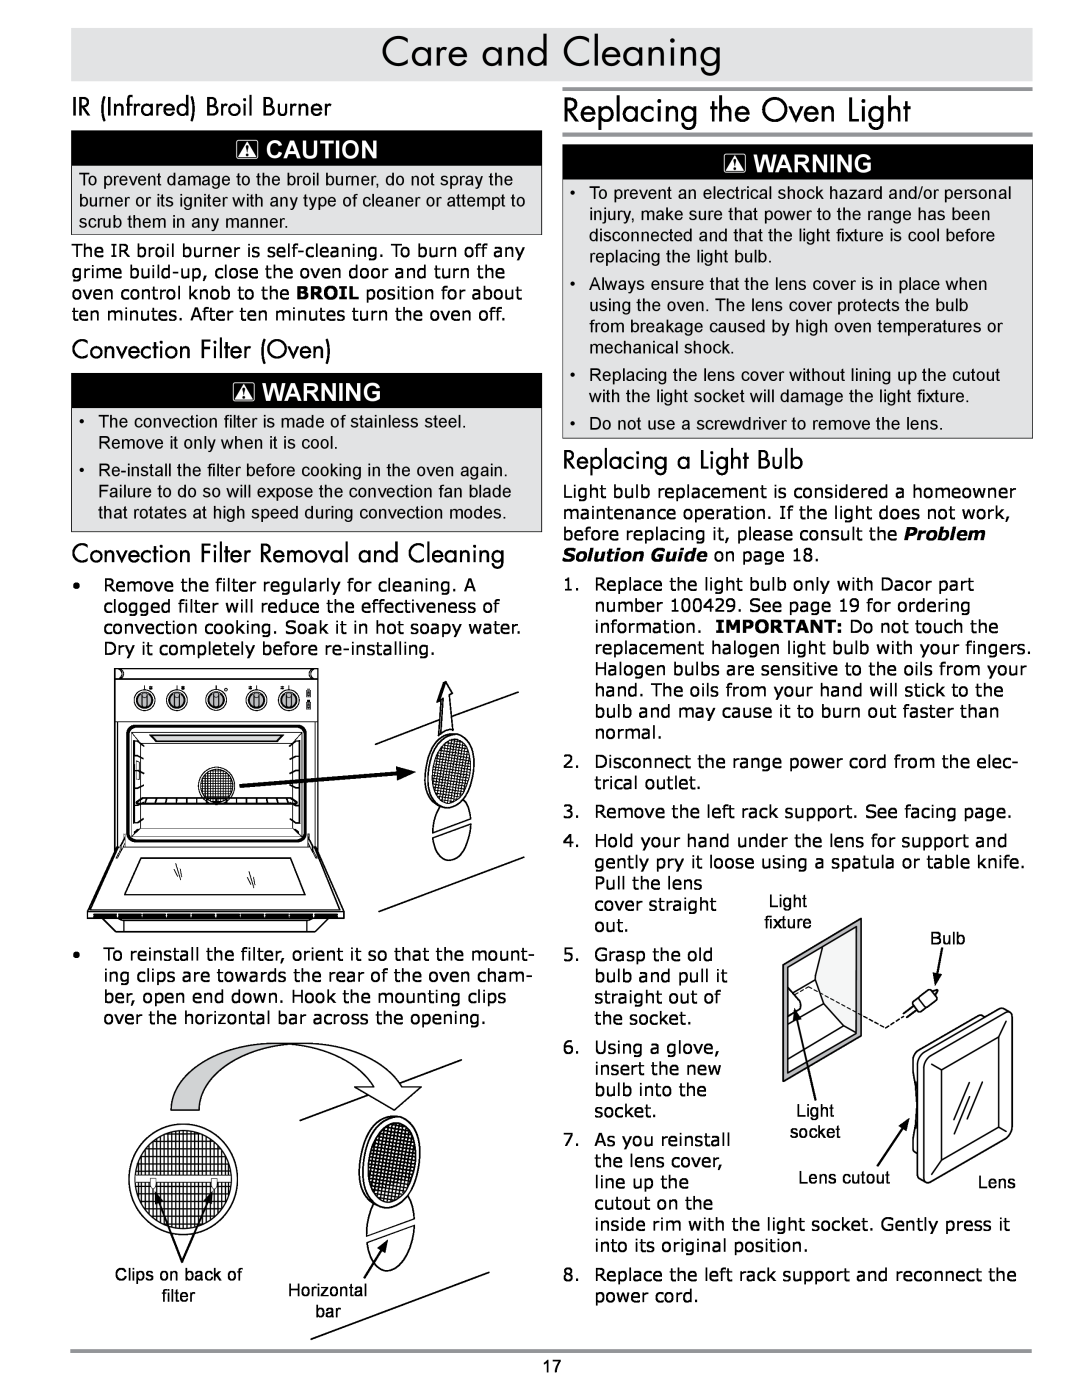 Sears ER30GI manual Replacing the Oven Light, IR Infrared Broil Burner, Convection Filter Oven, Replacing a Light Bulb 